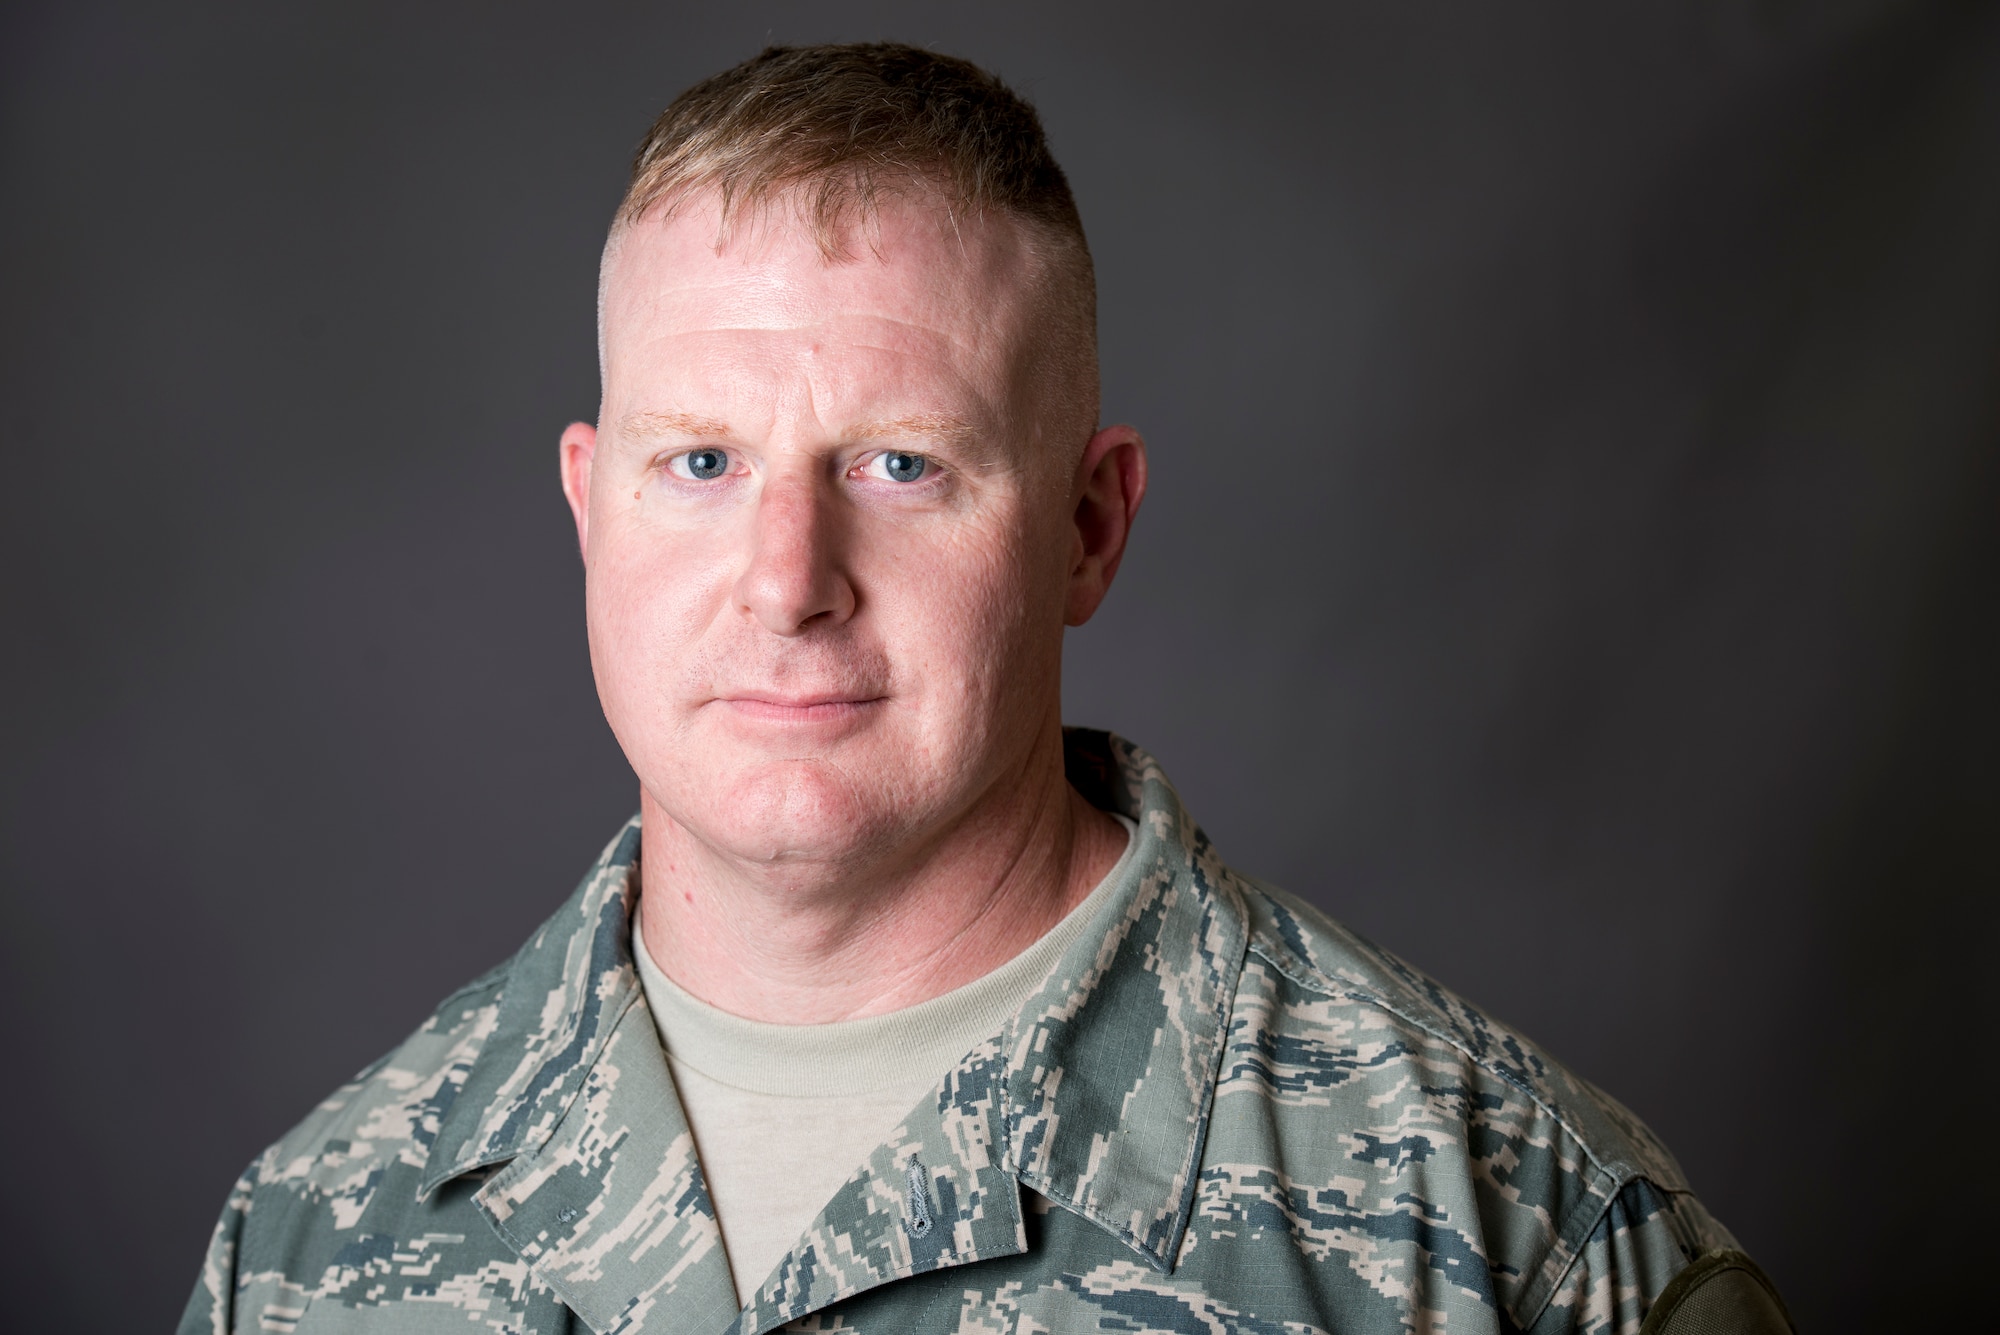 Deployed photograph of Senior Master Sgt. Eric Price. (U.S. Air Force photo by Staff Sgt. Jeremy Bowcock)